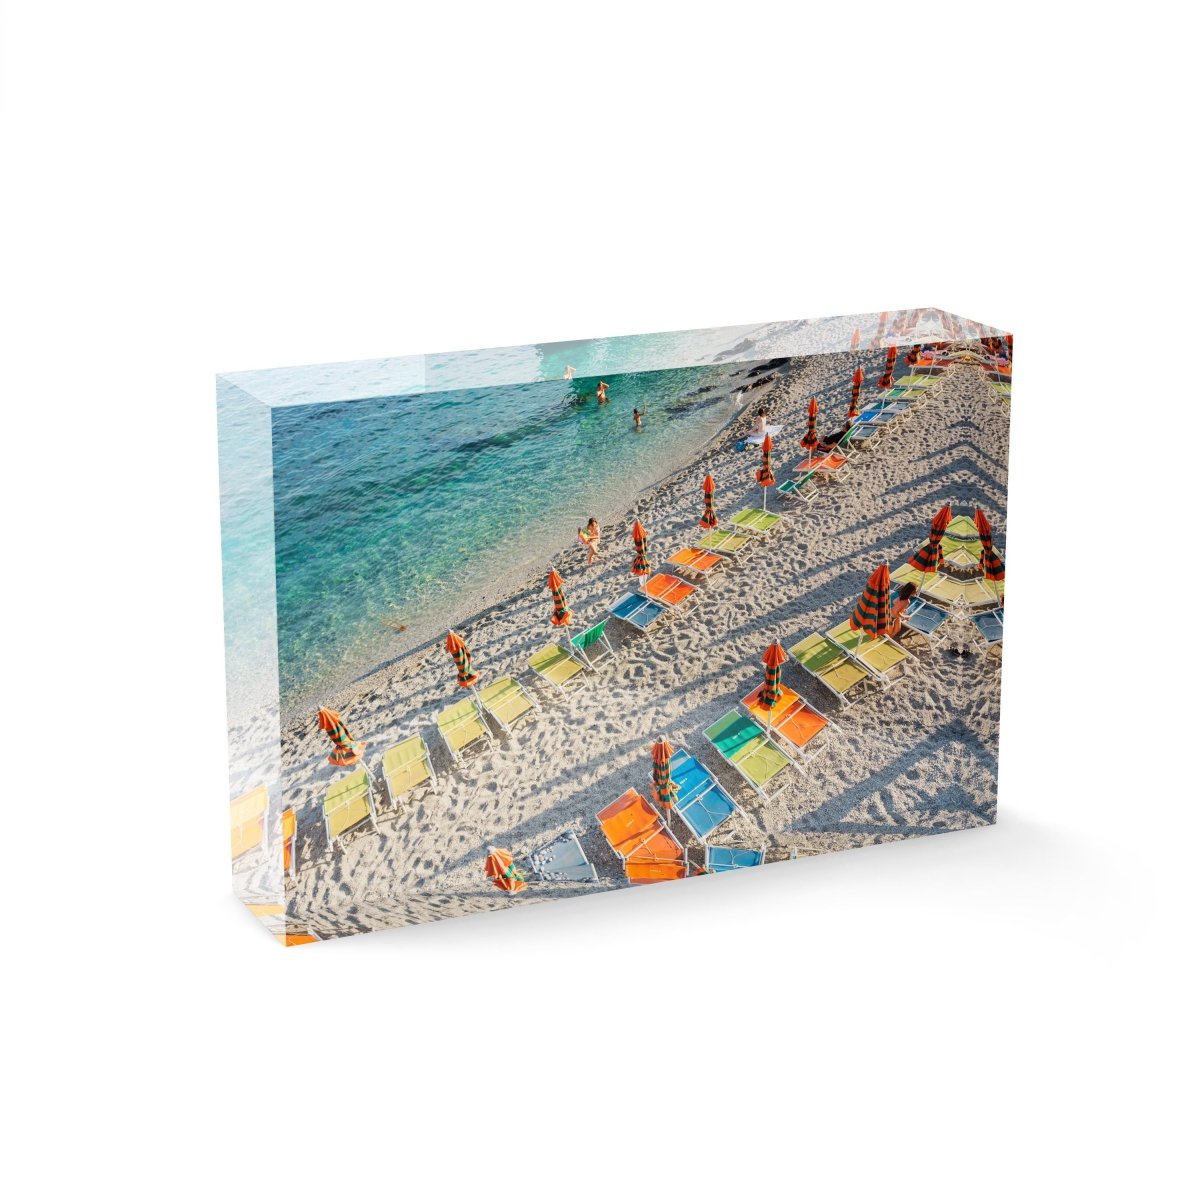 Orange, green and blue chairs on beach in Cinque Terre